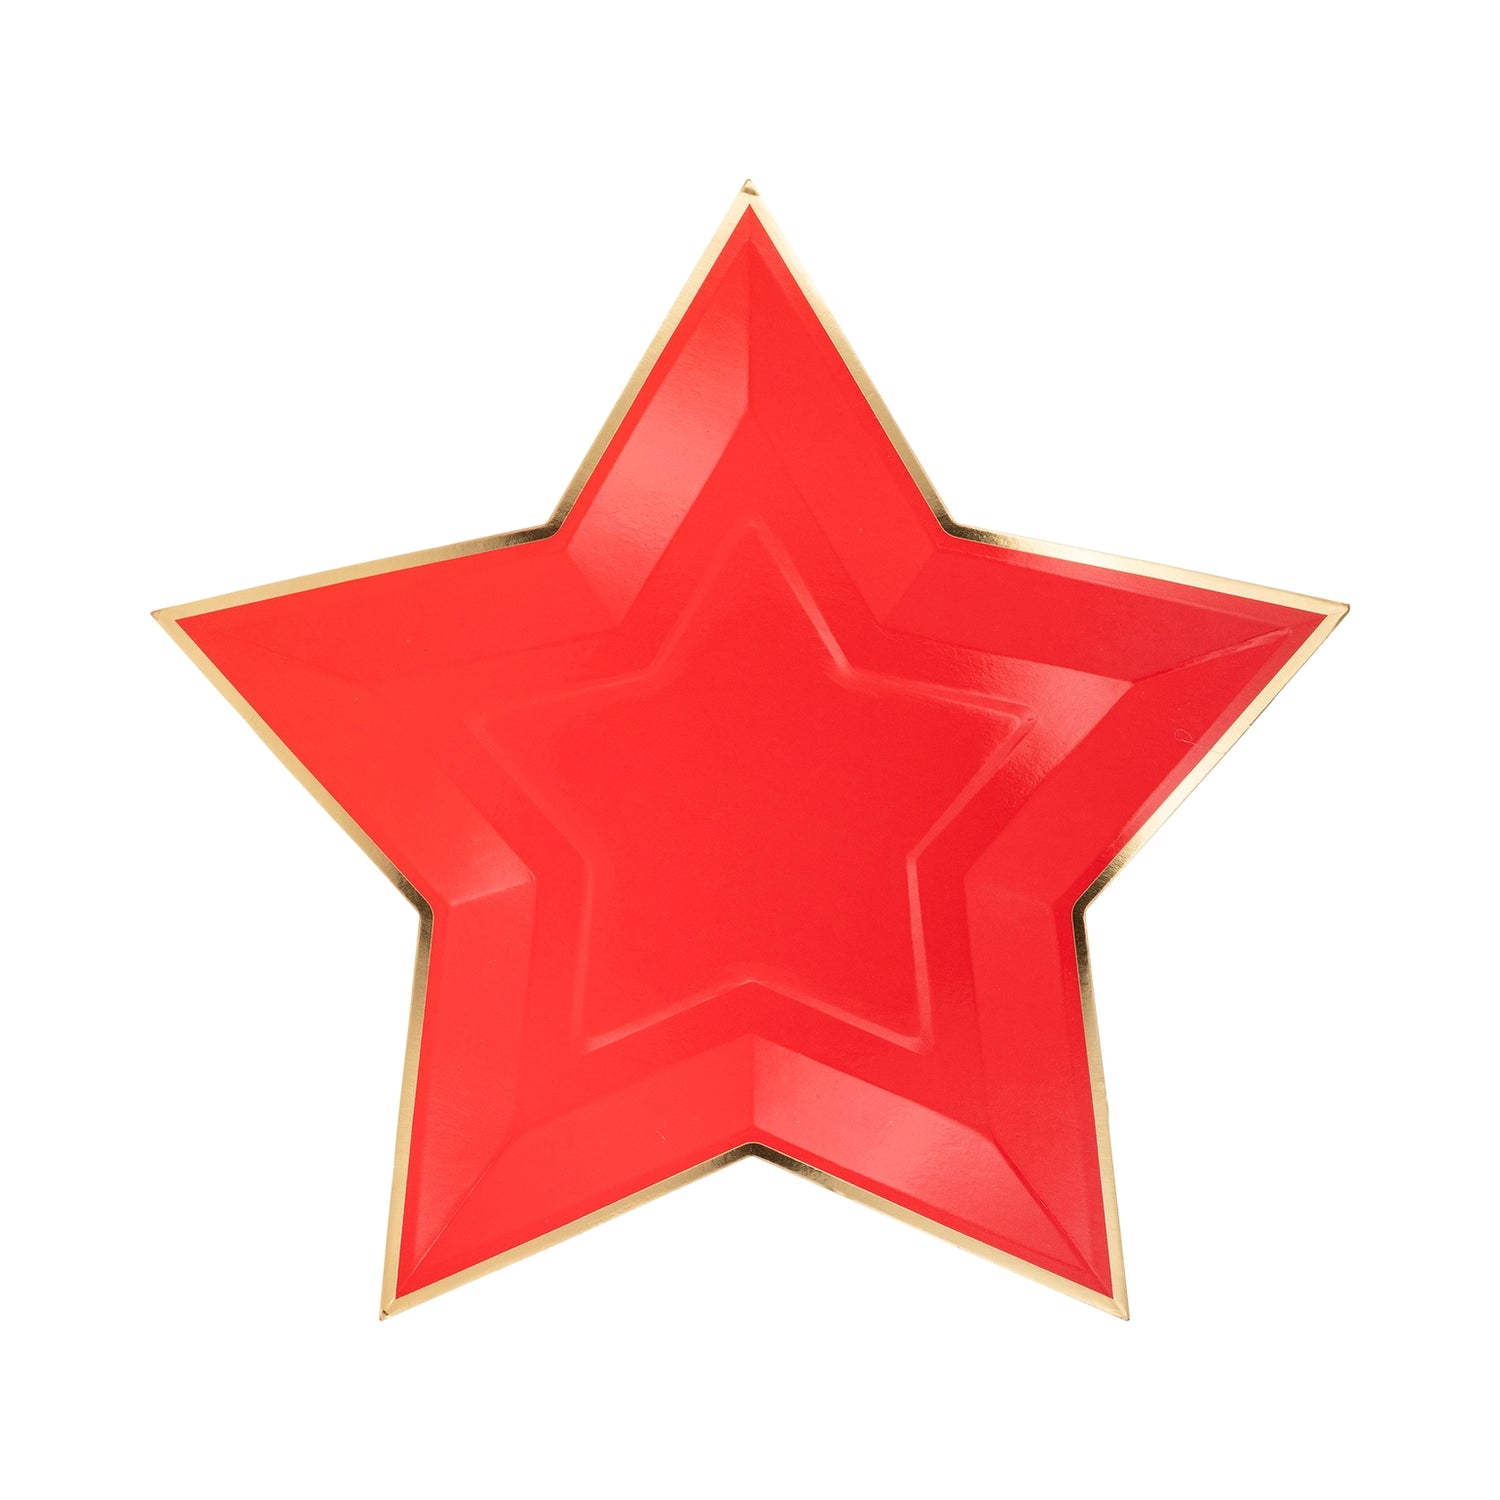 Red star shaped paper plate with gold foil rim on a white background.